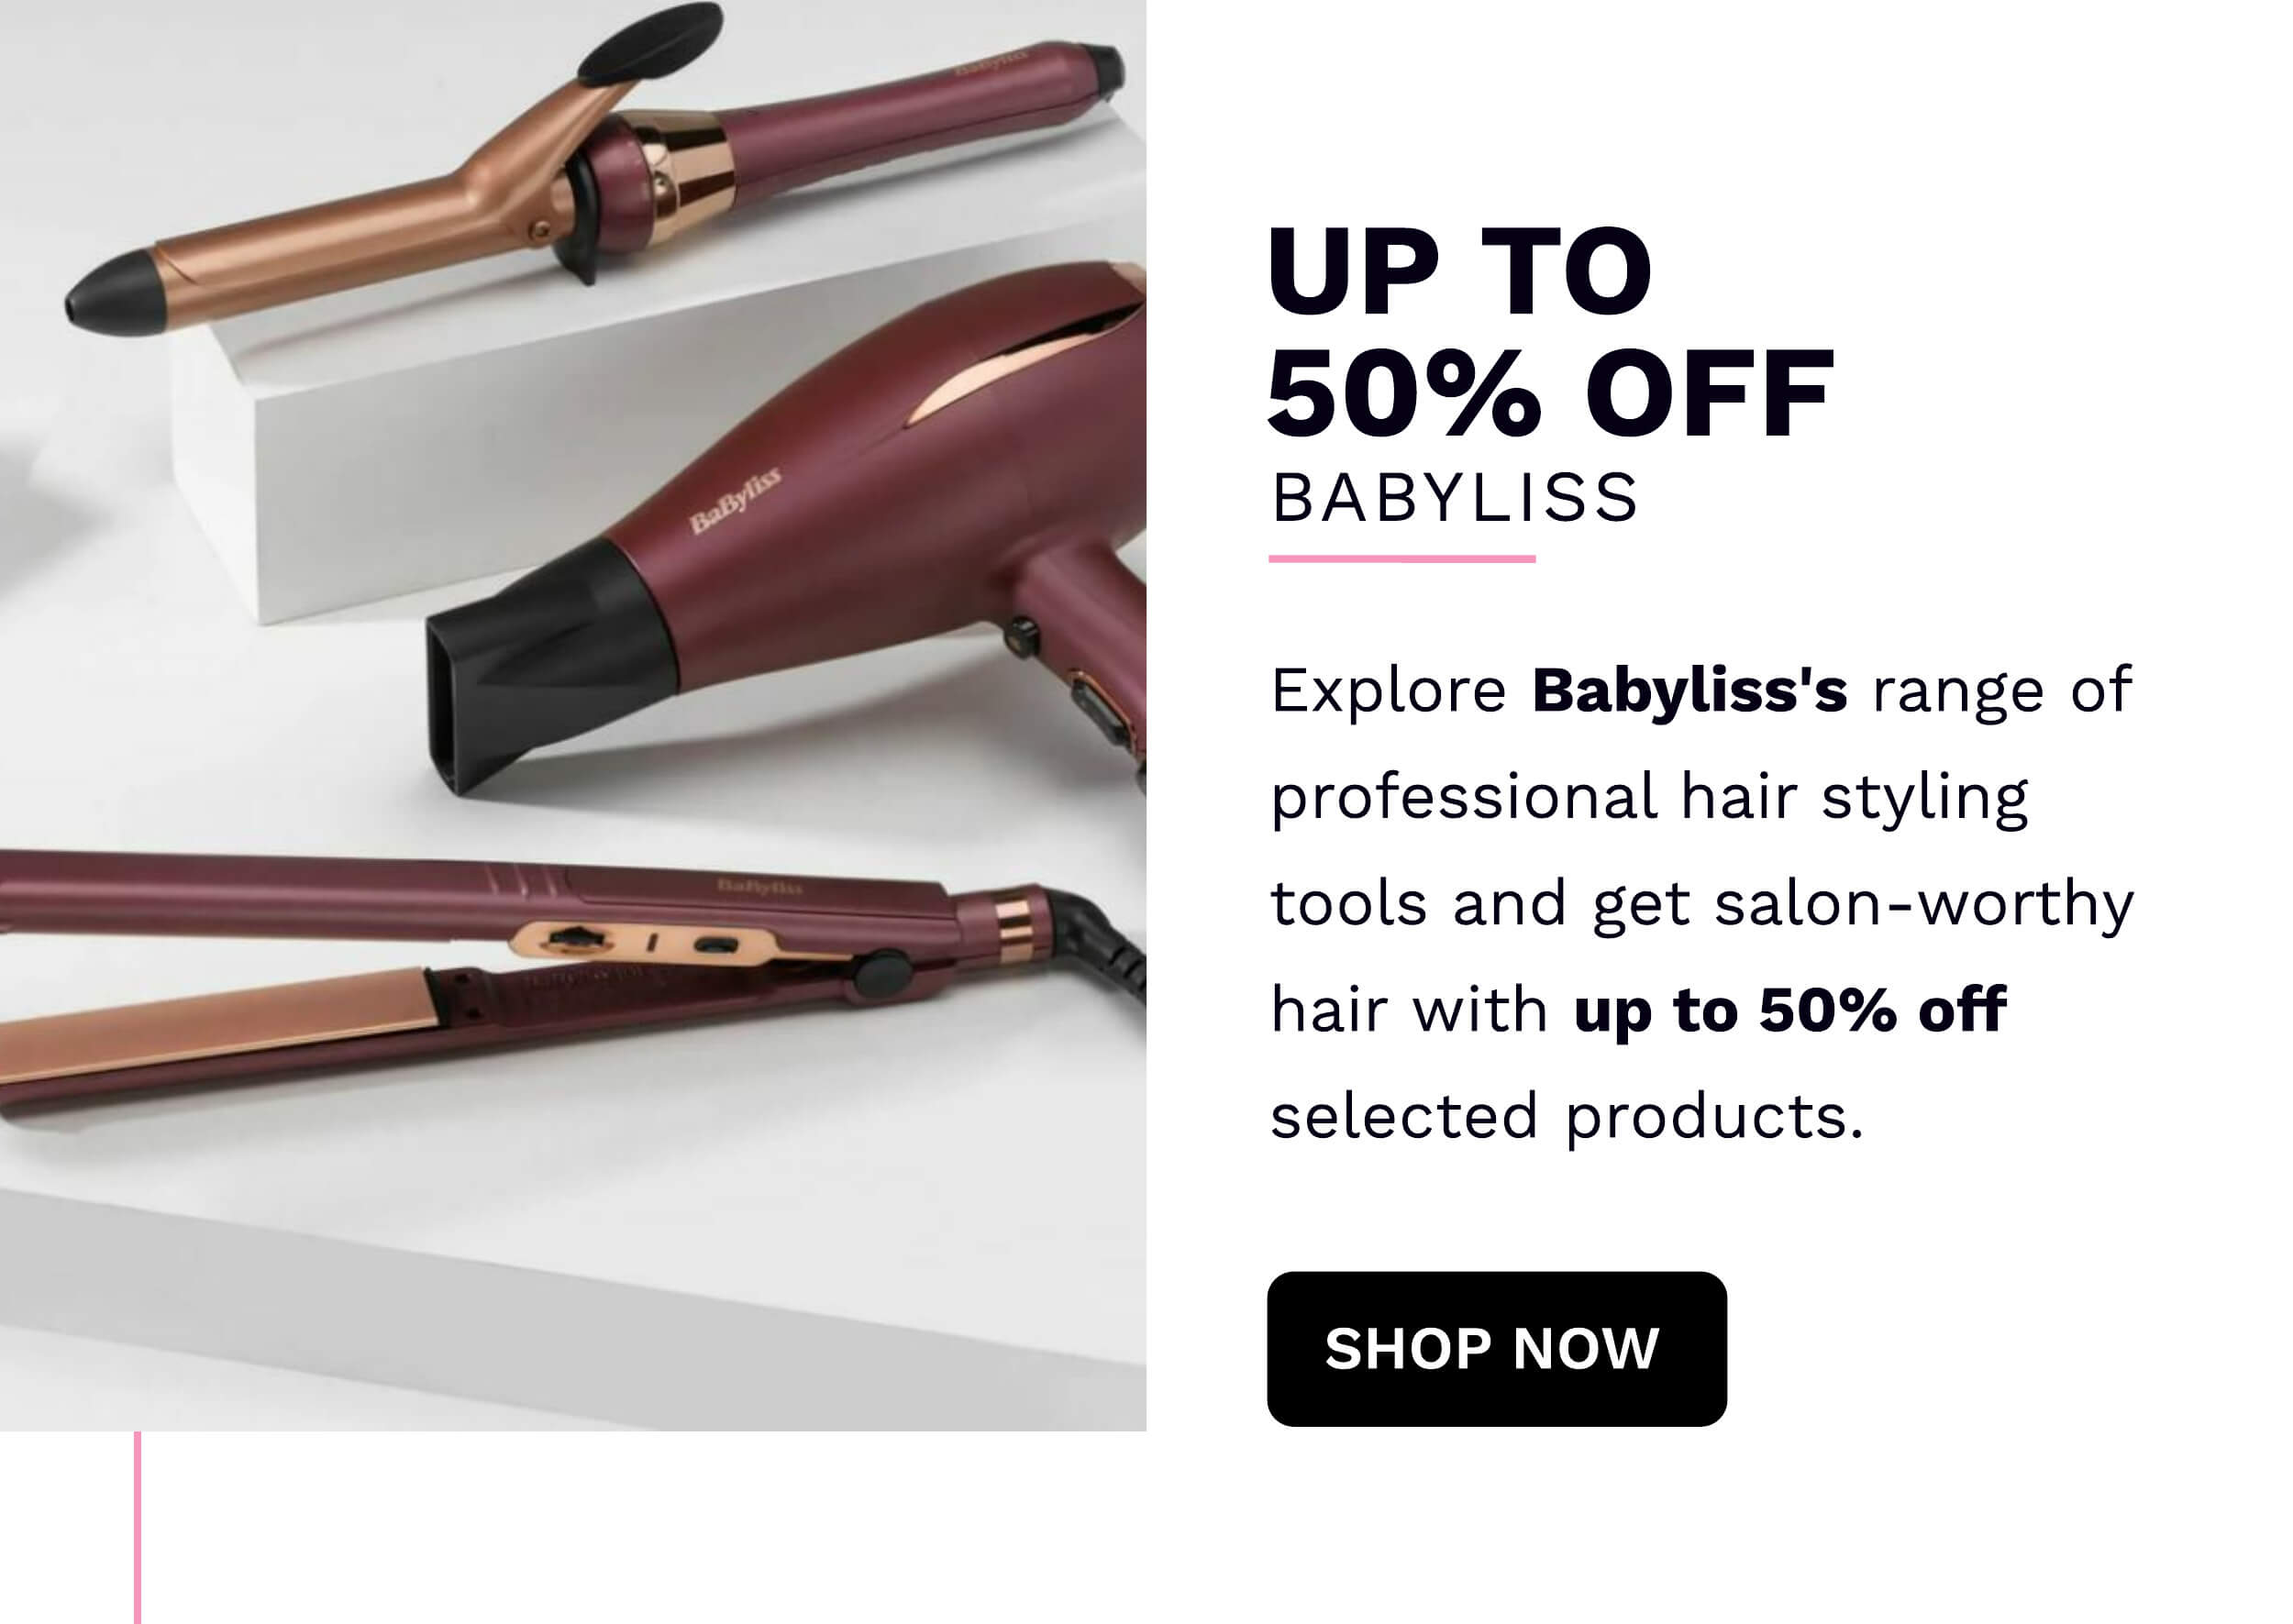 UP TO 50% BABYLISS